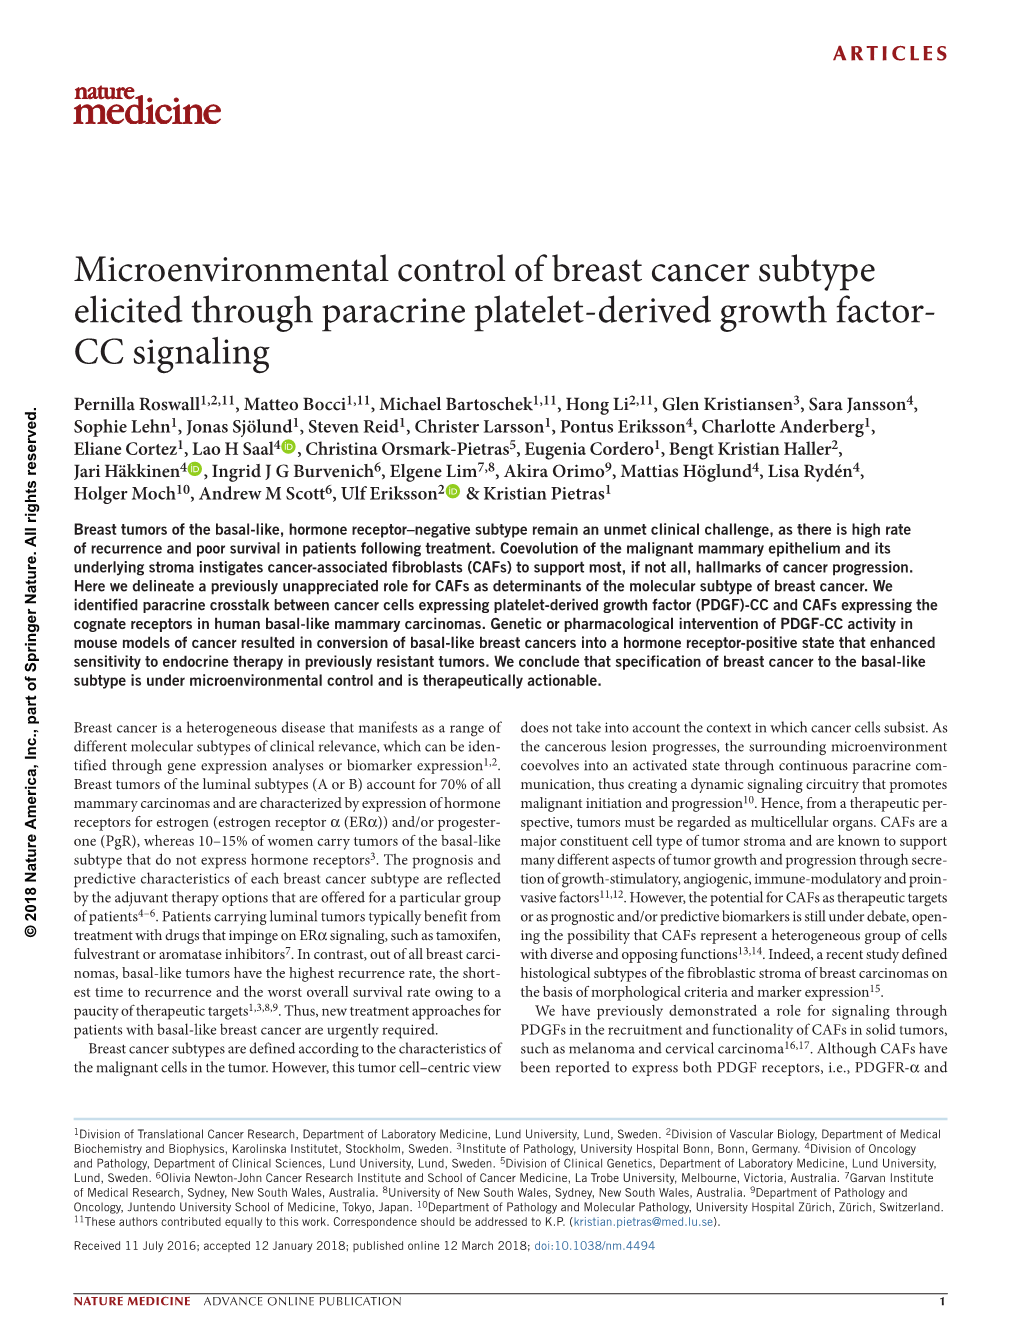 Microenvironmental Control of Breast Cancer Subtype Elicited Through